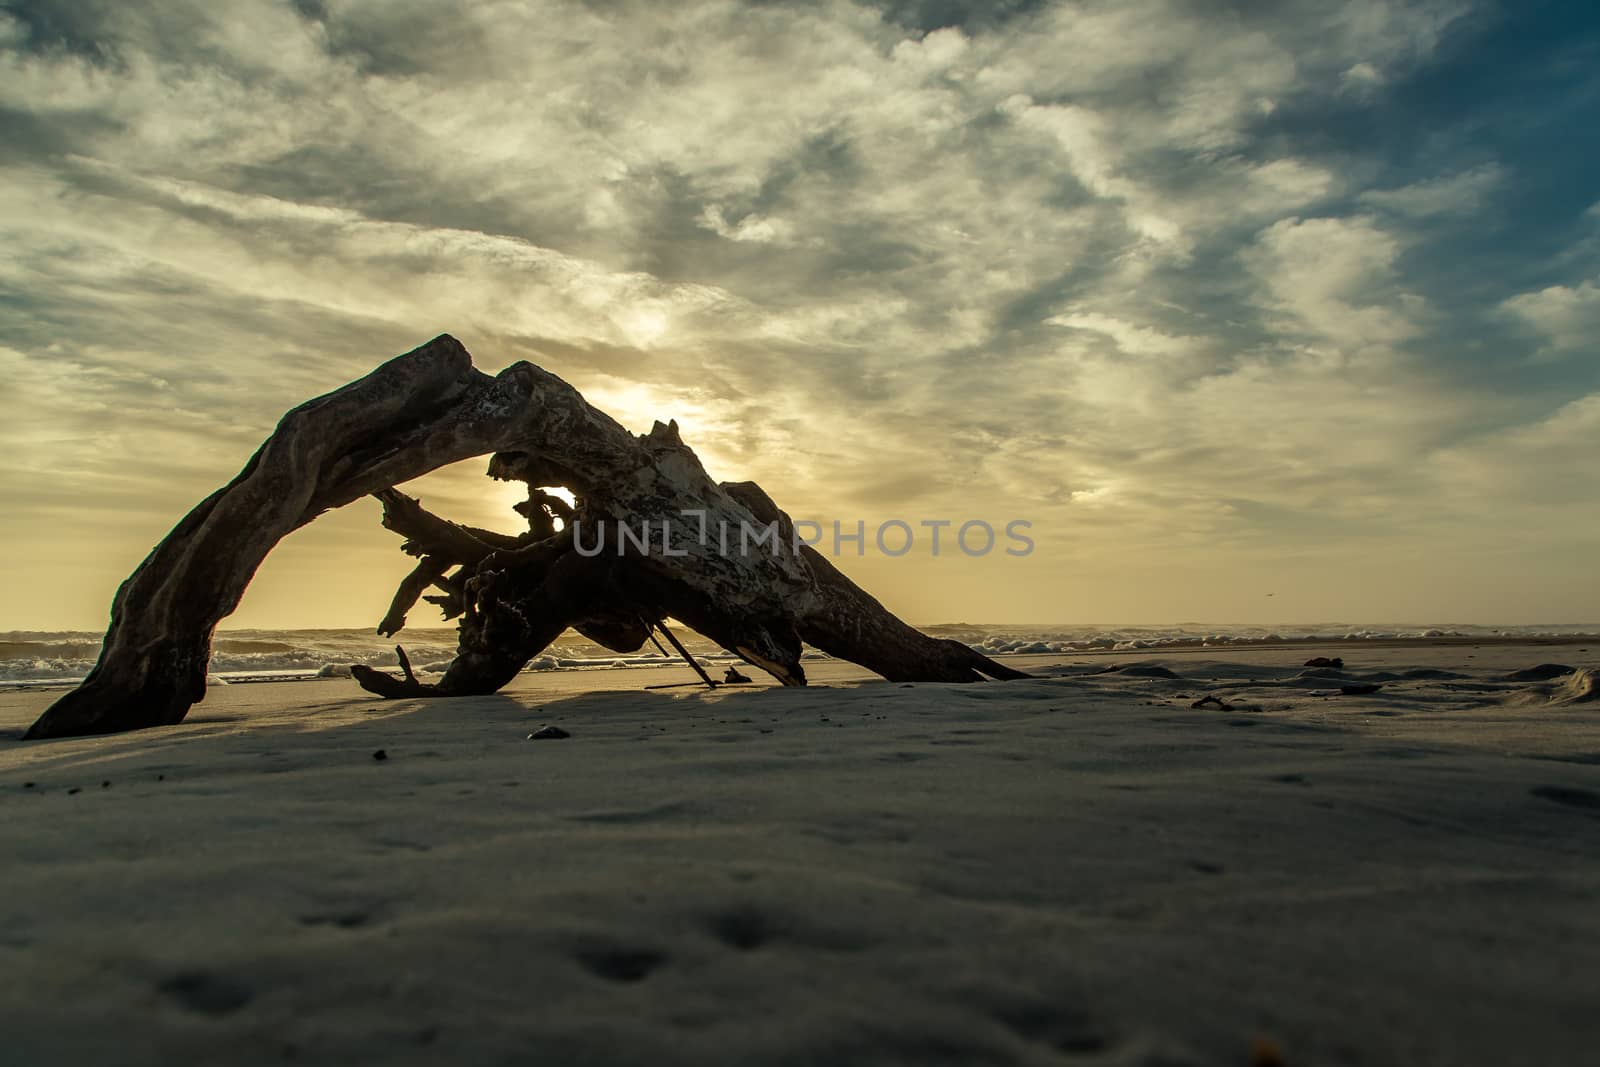 Driftwood on the Beach by adifferentbrian